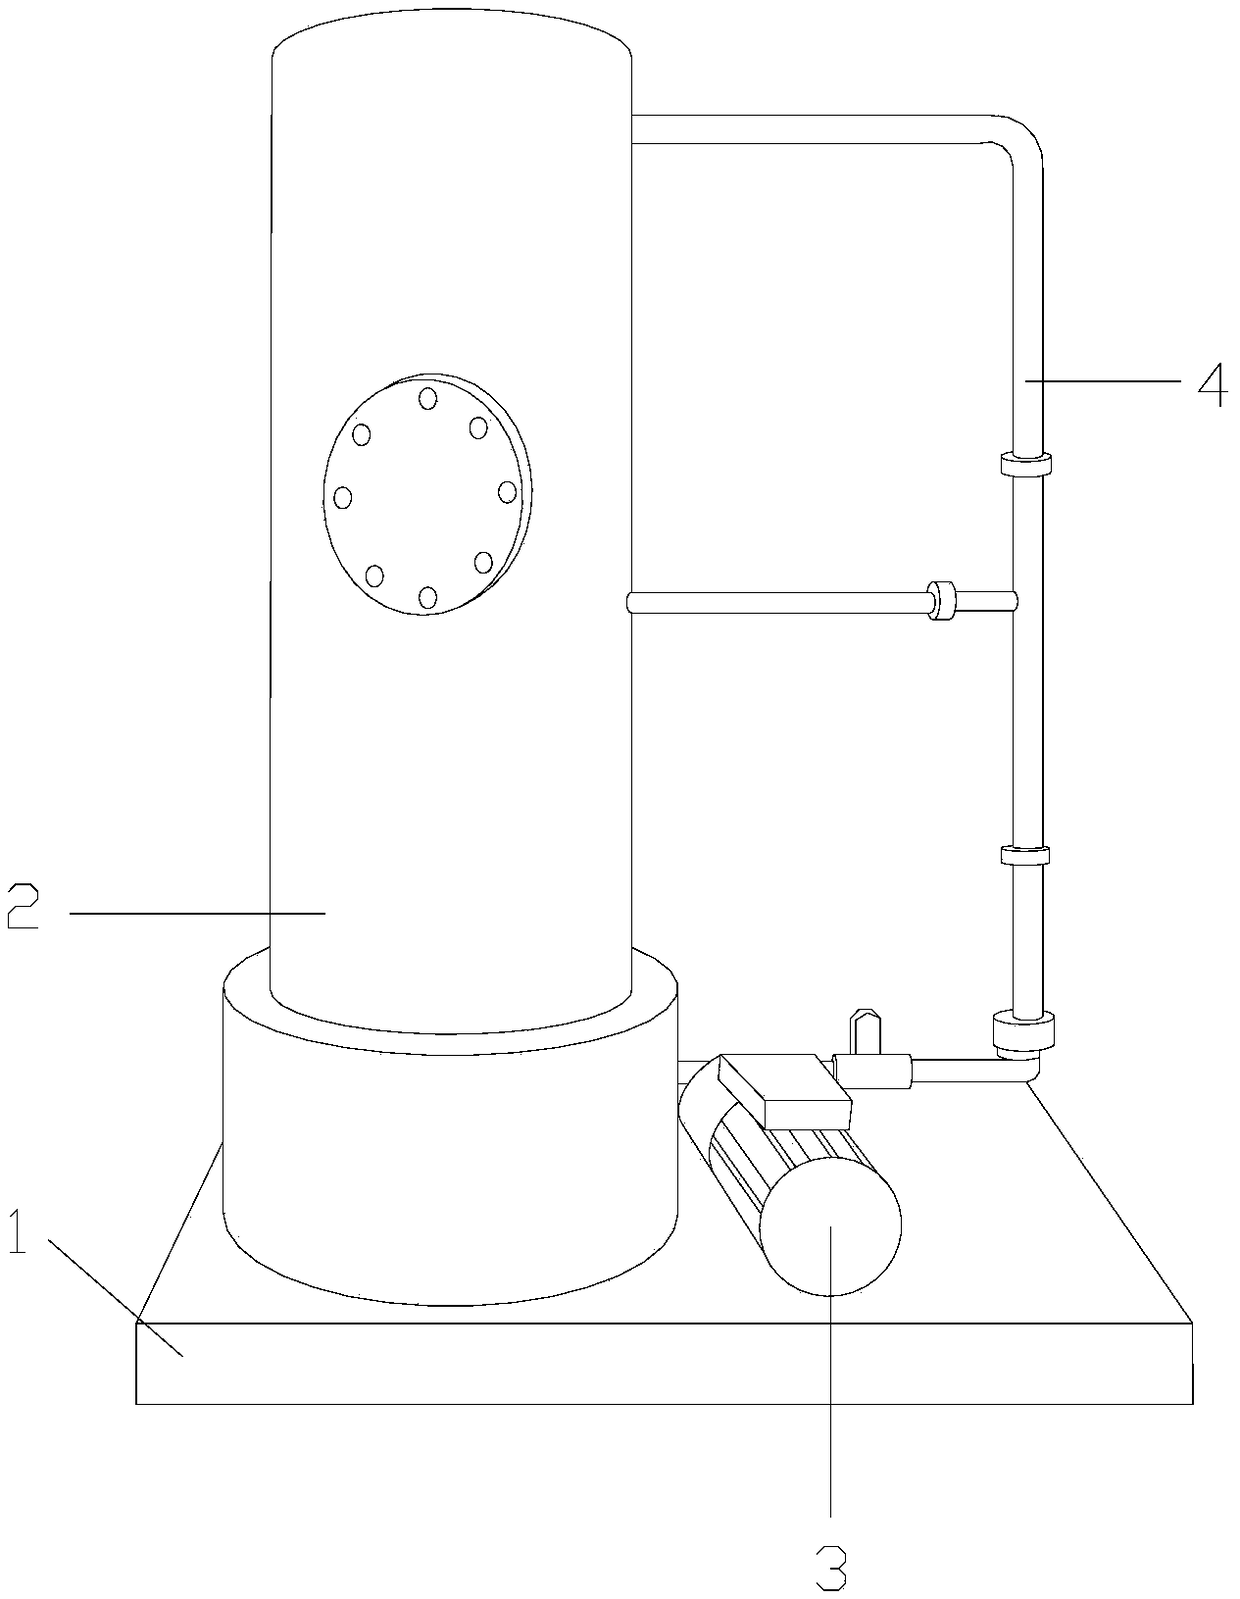 Plant volatile gas collecting device for solid phase micro-extraction